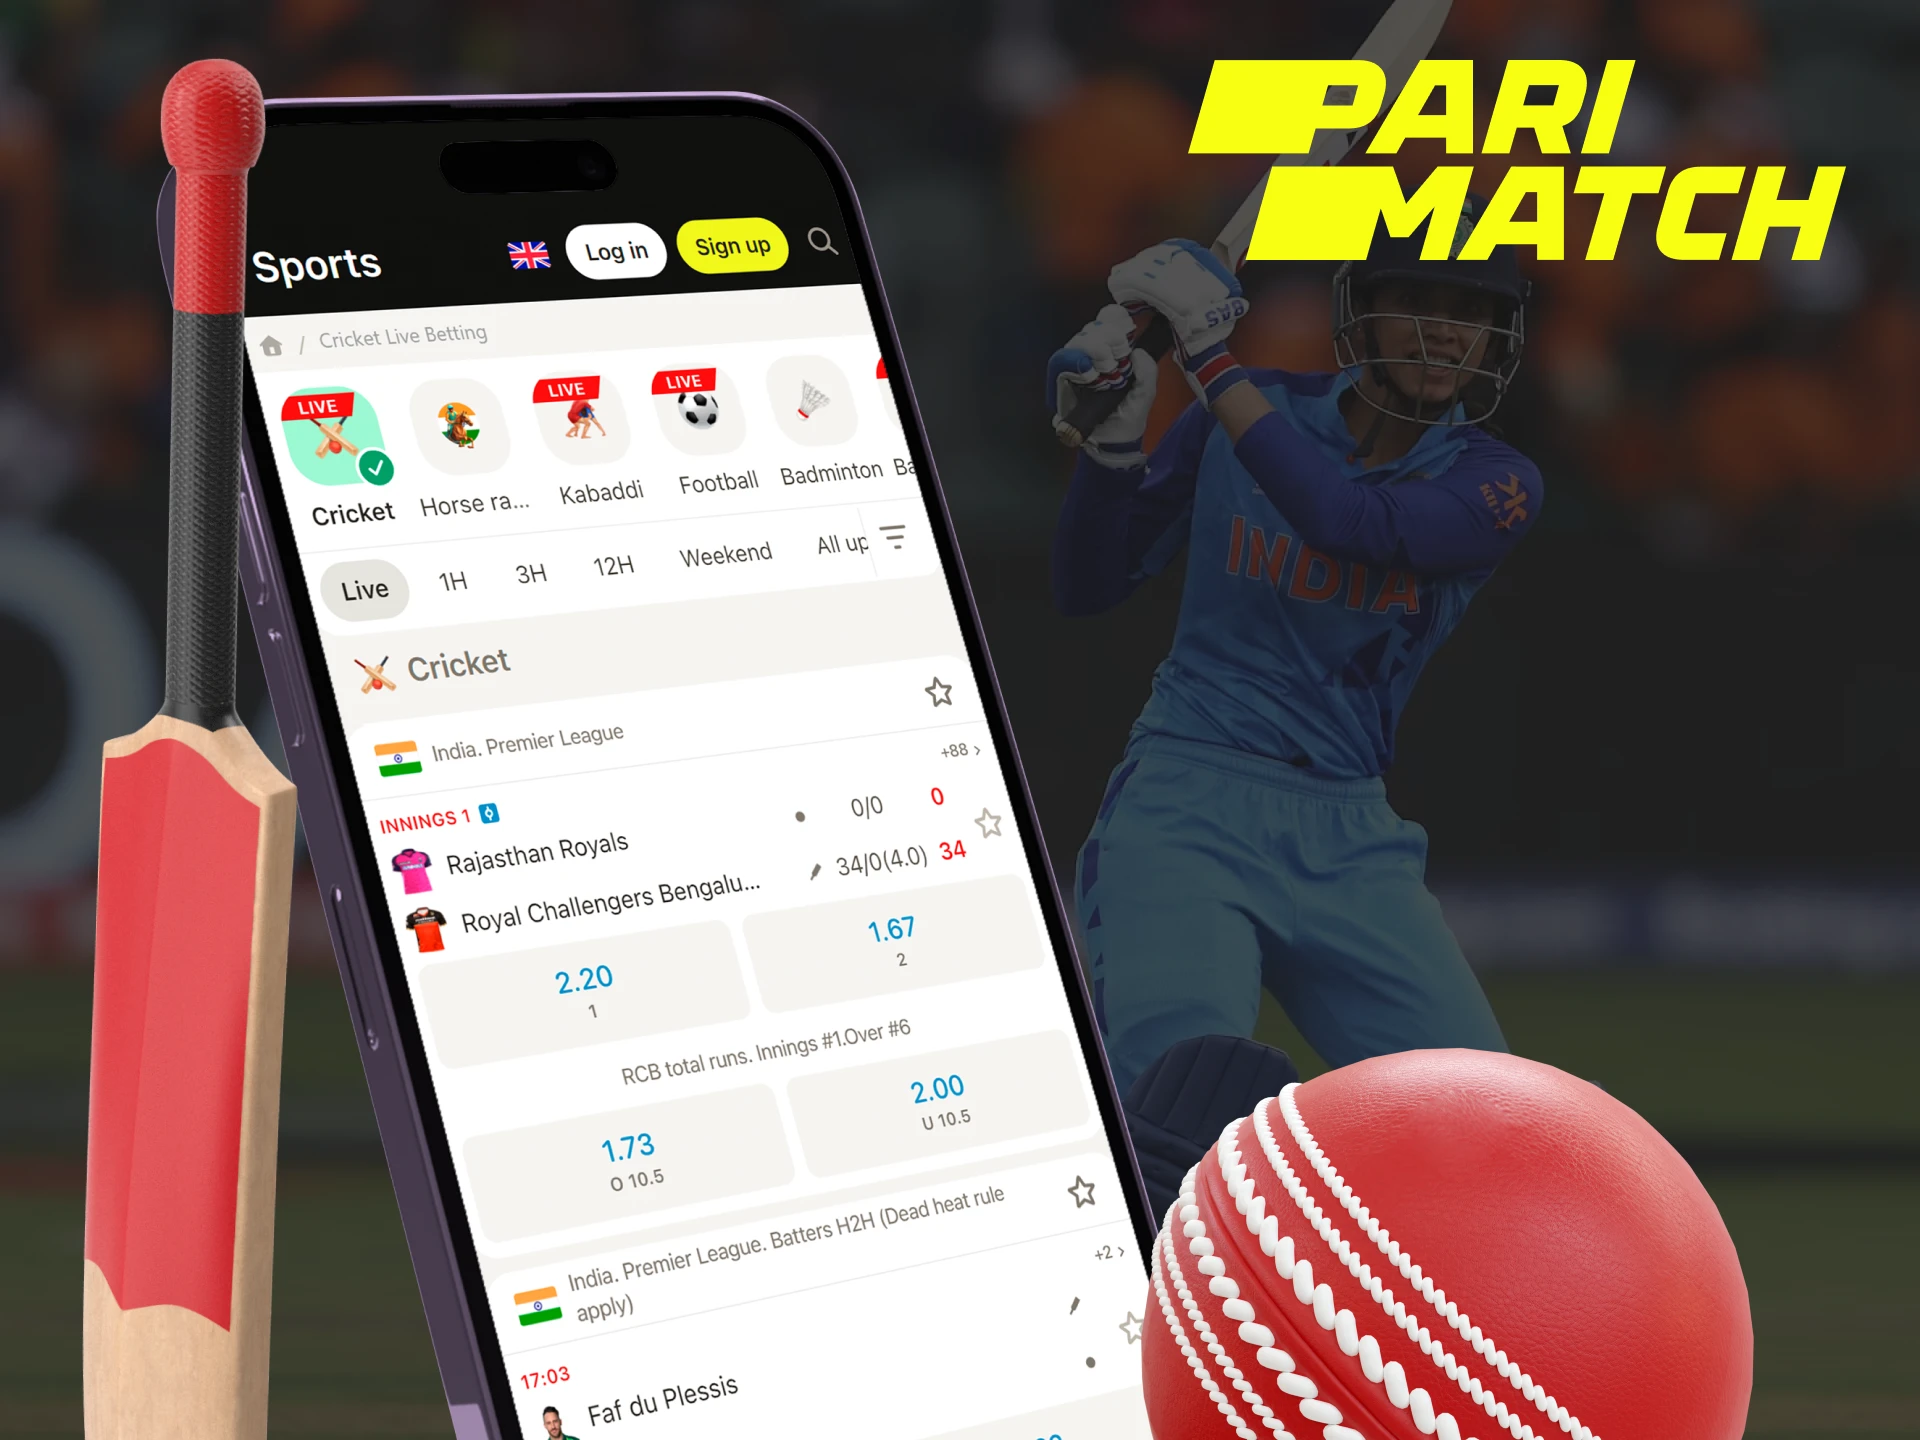 Place bets on cricket using the Parimatch app and win big.